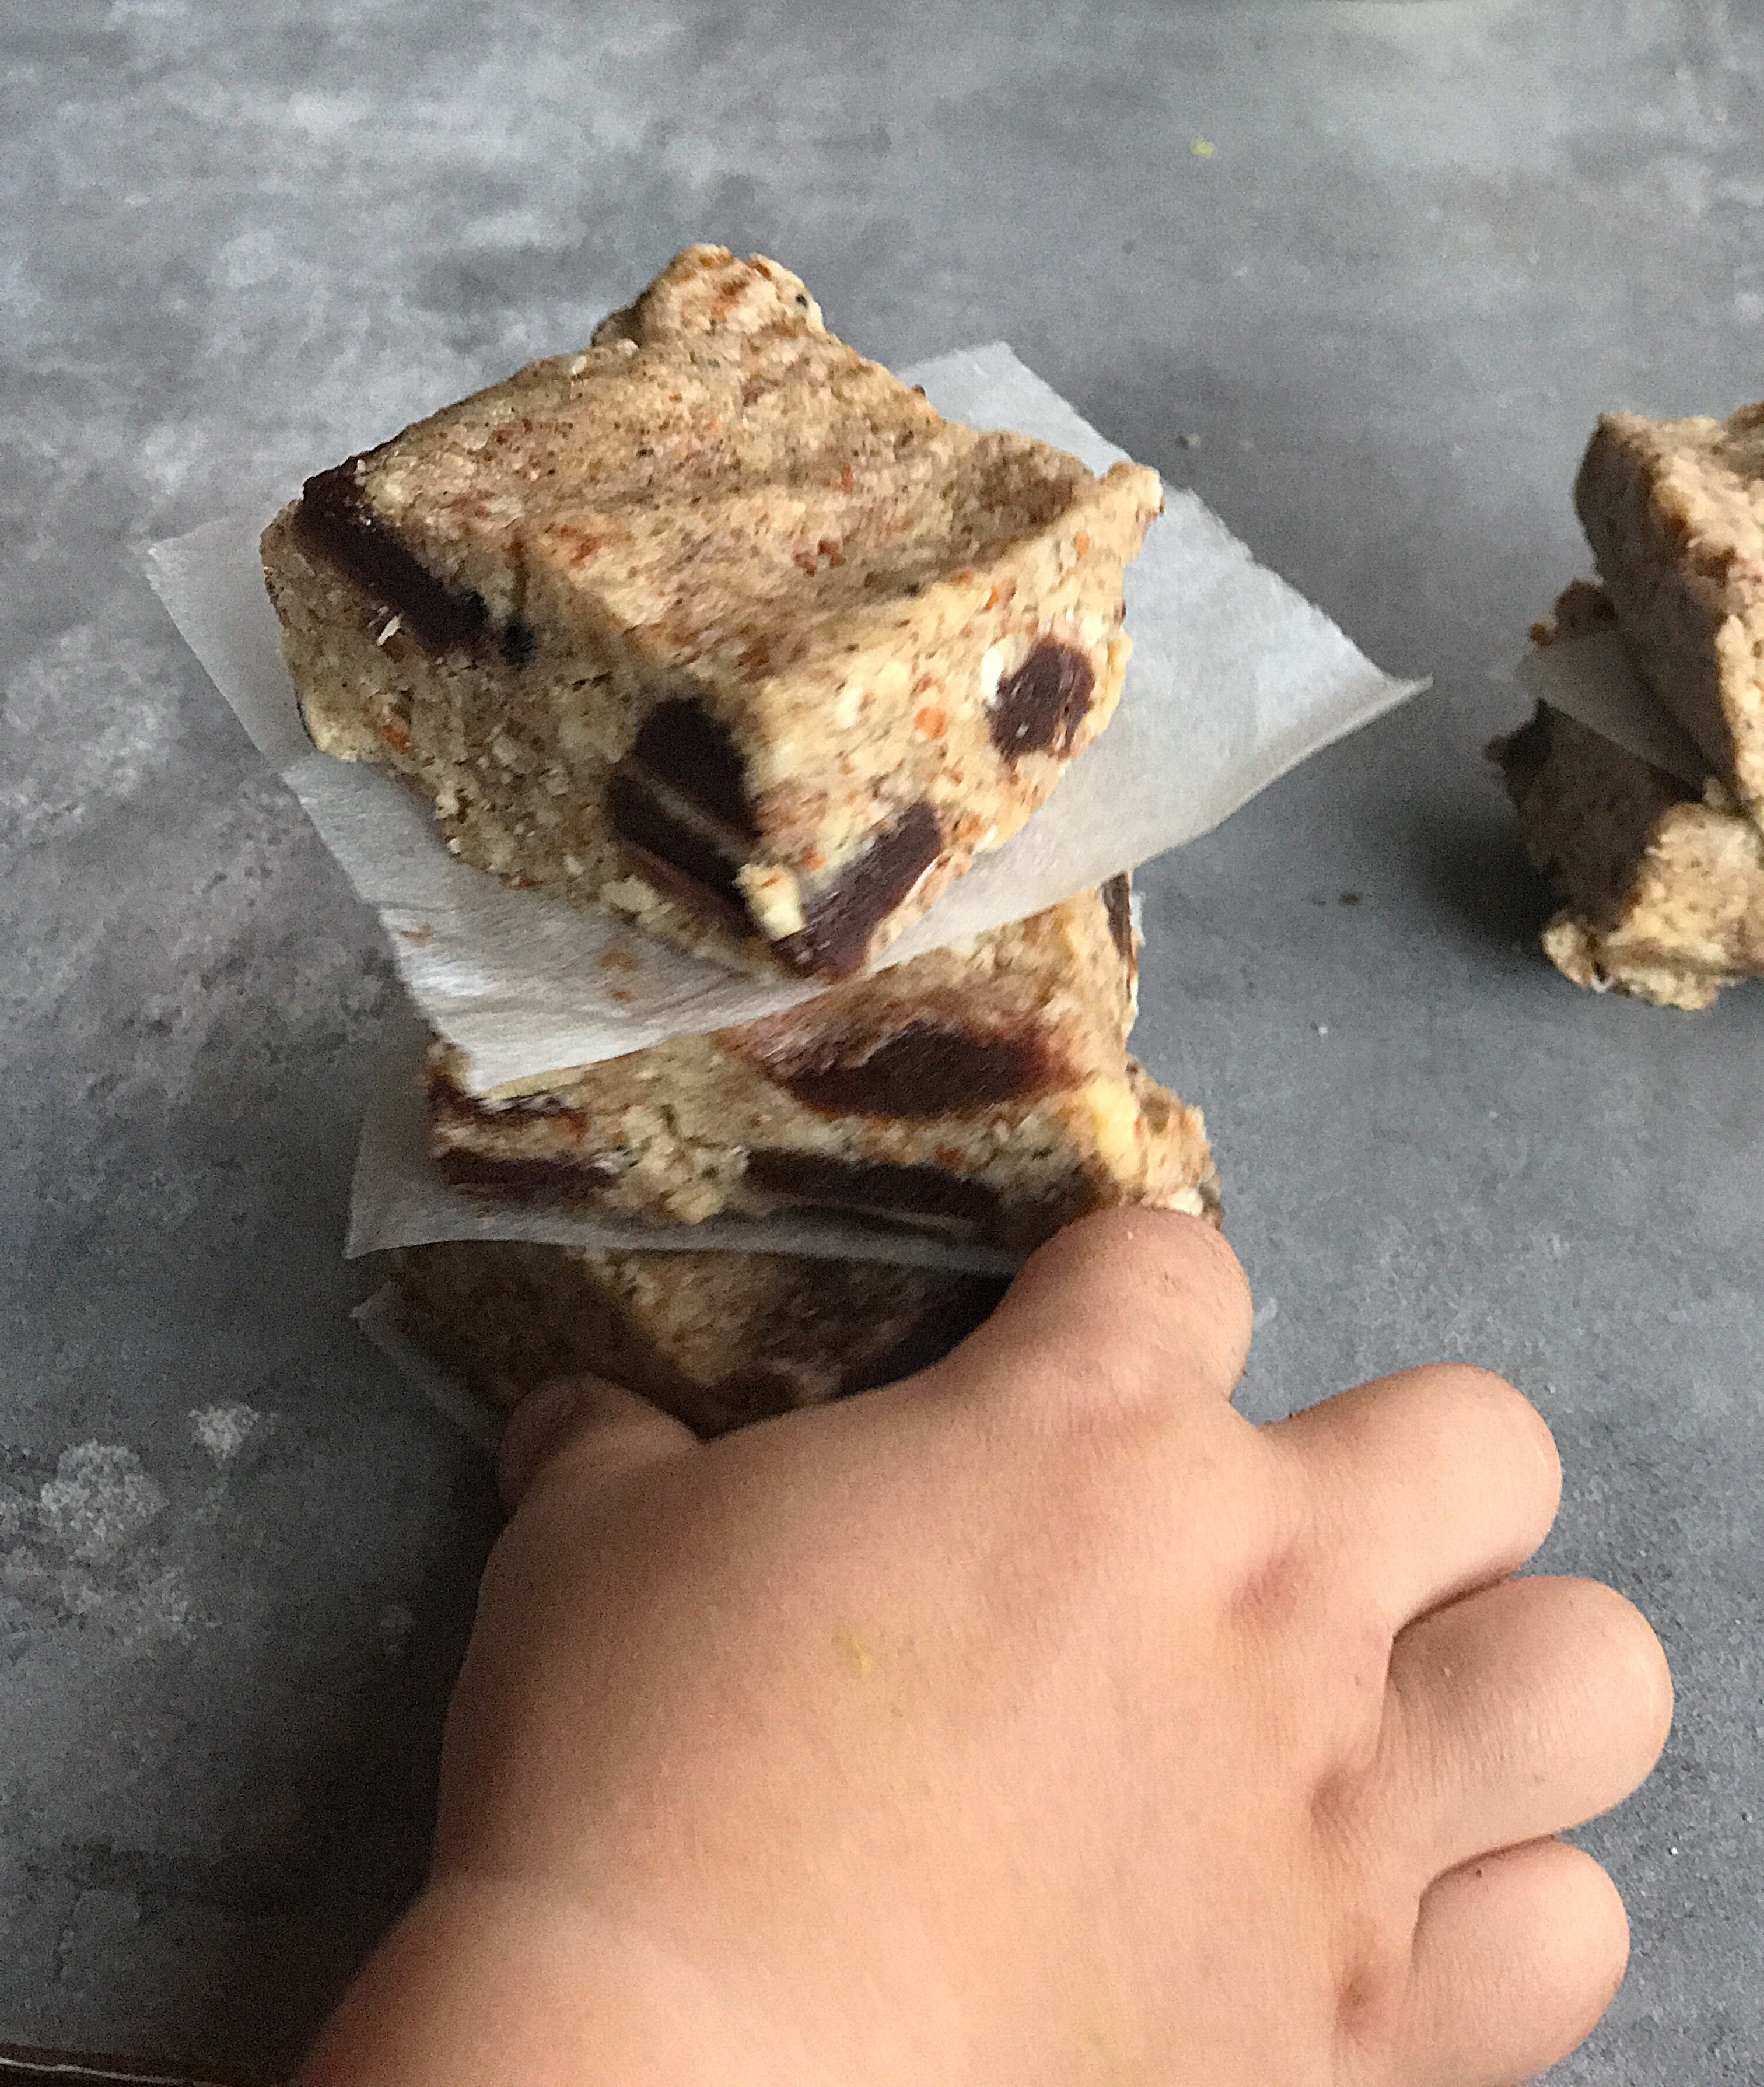 Reaching for the Bulletproof chocolate cookie dough snack!